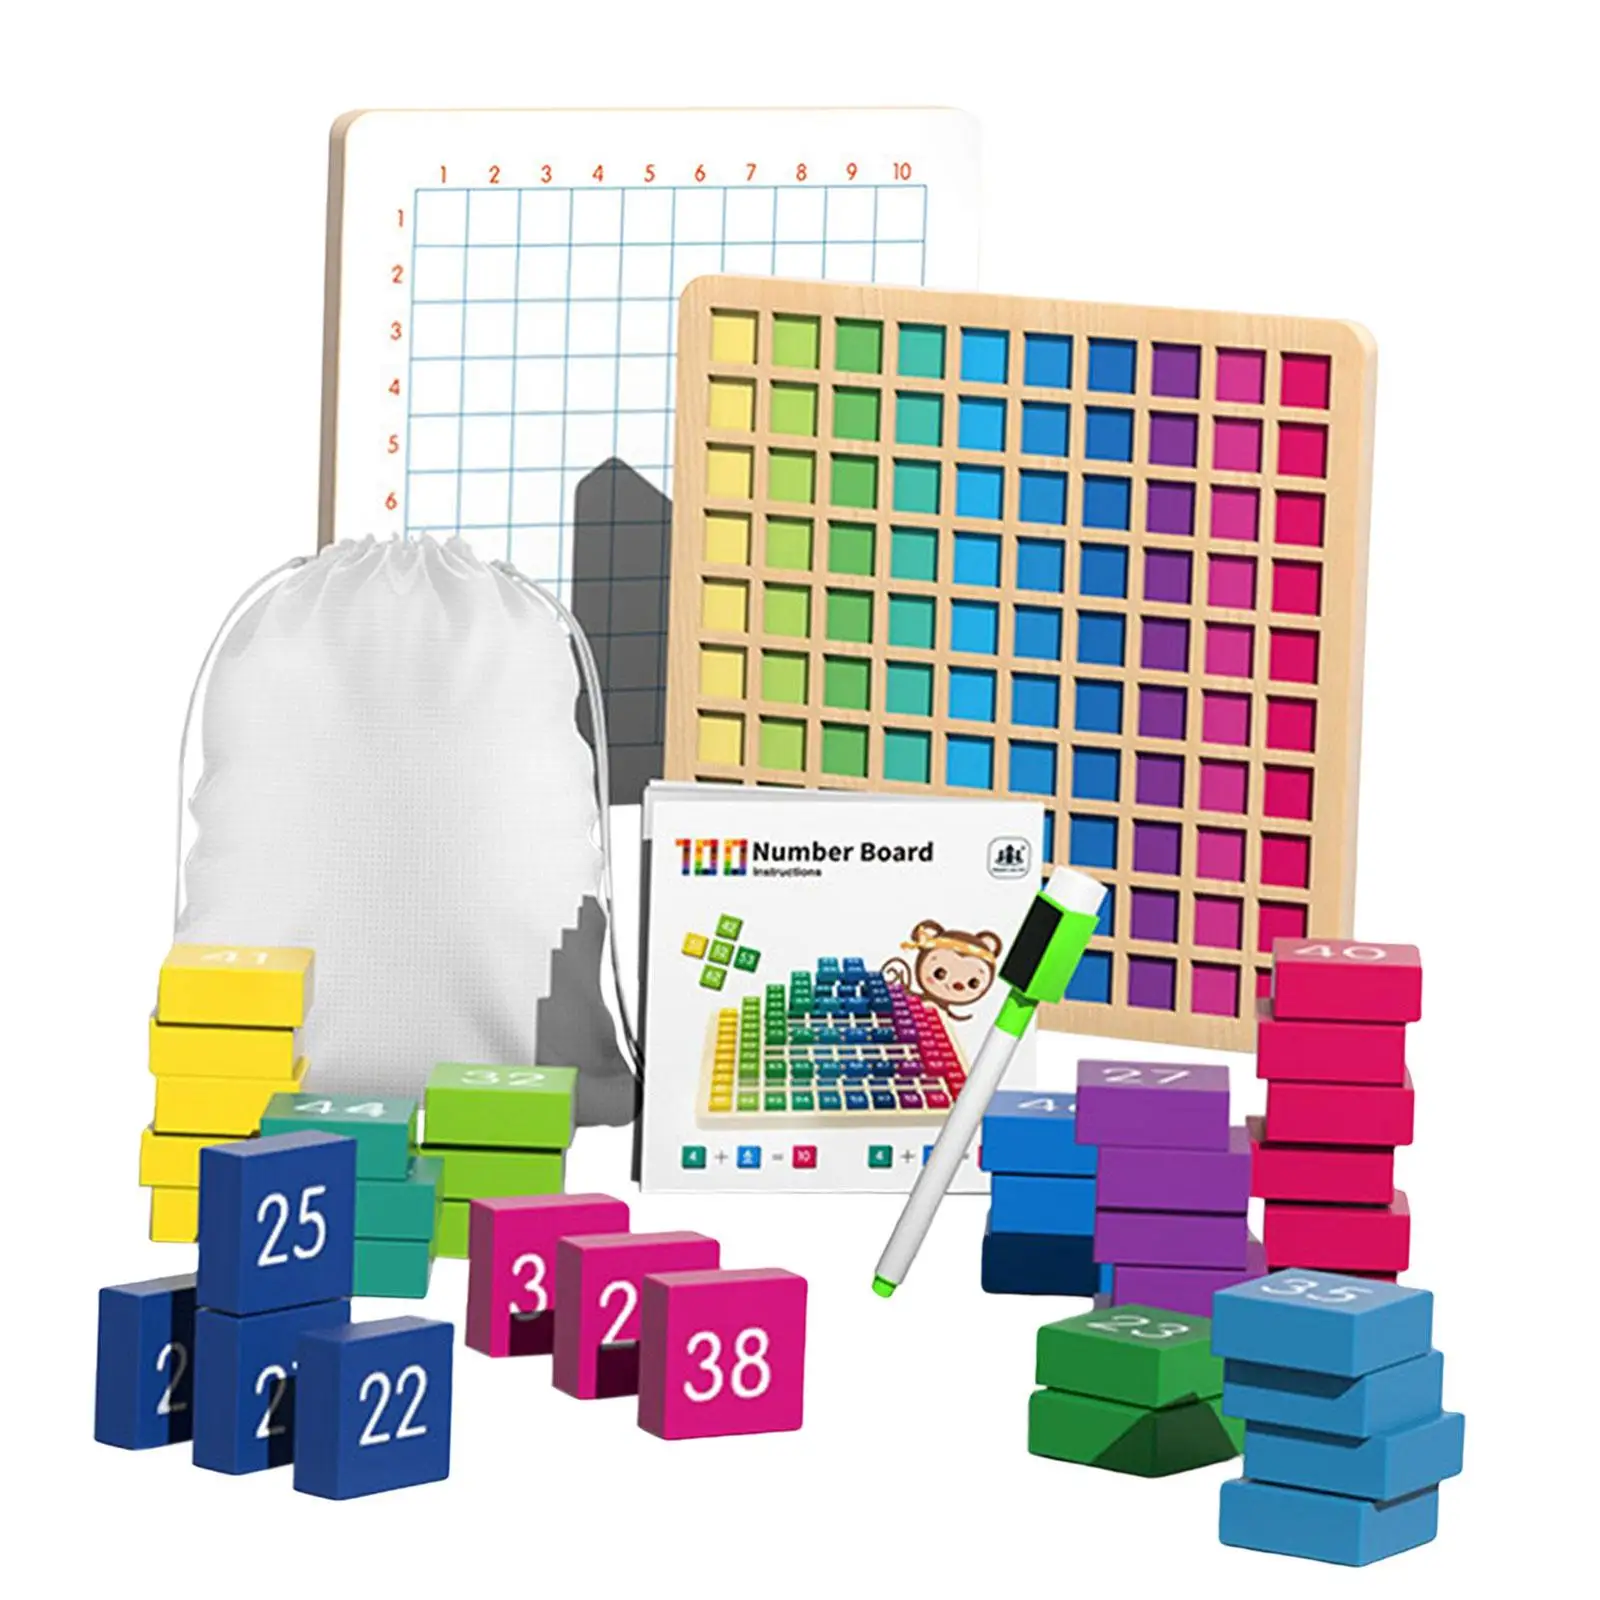 Multiplication Table Board Game Rewritable Whiteboard Math Education Materials